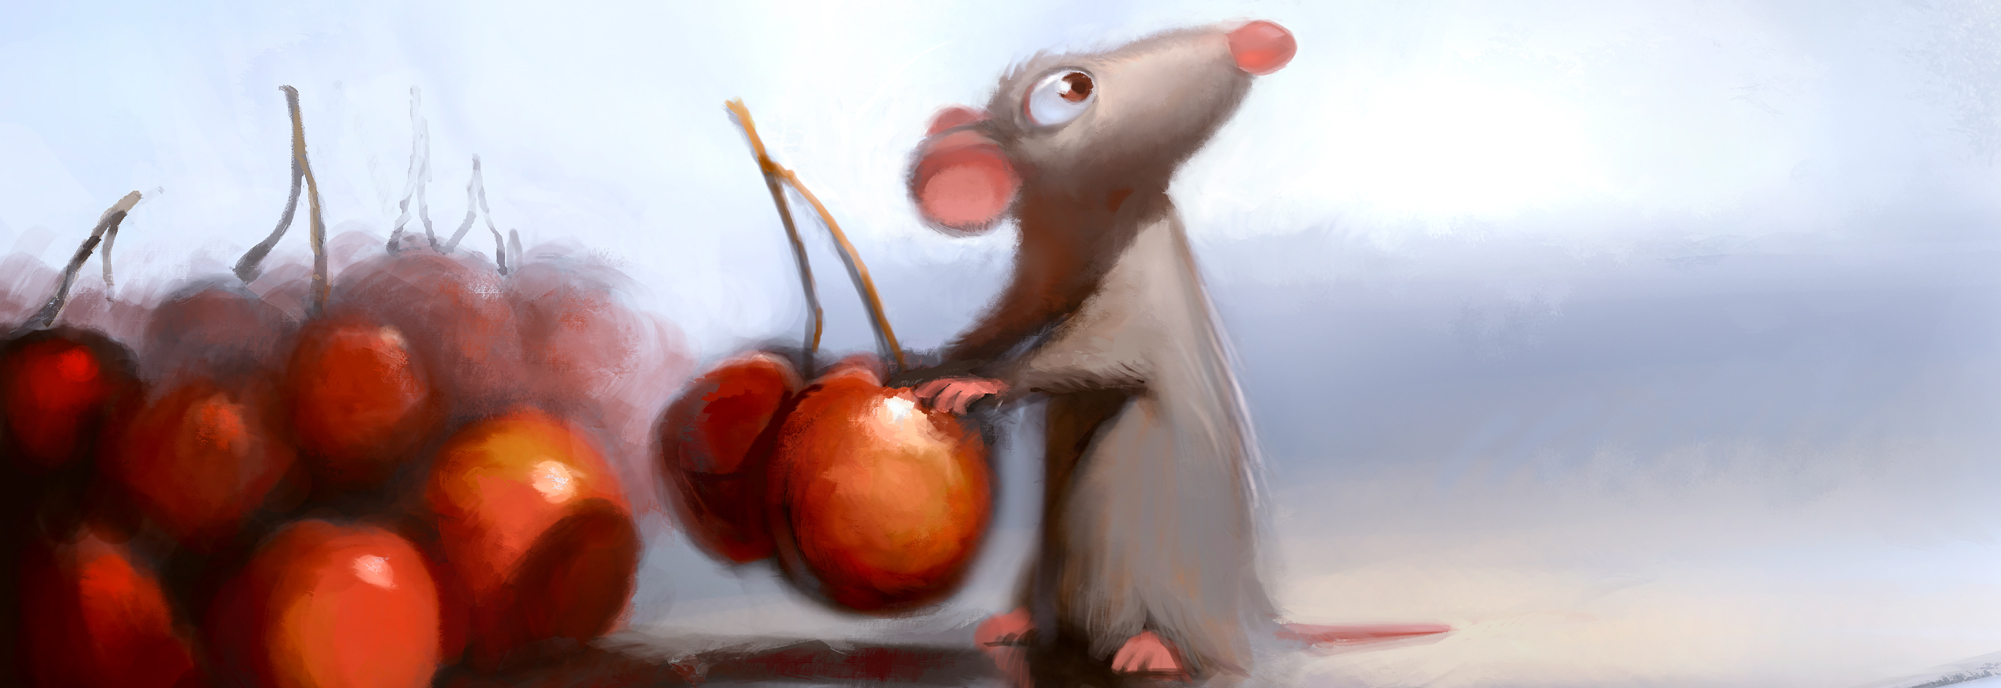 Animation of a rat stealing two cherries. The cherries have been taken from a pile of cherries scattered across a light surface. Body facing the viewer, the rat gazes over its left shoulder at something out of view.